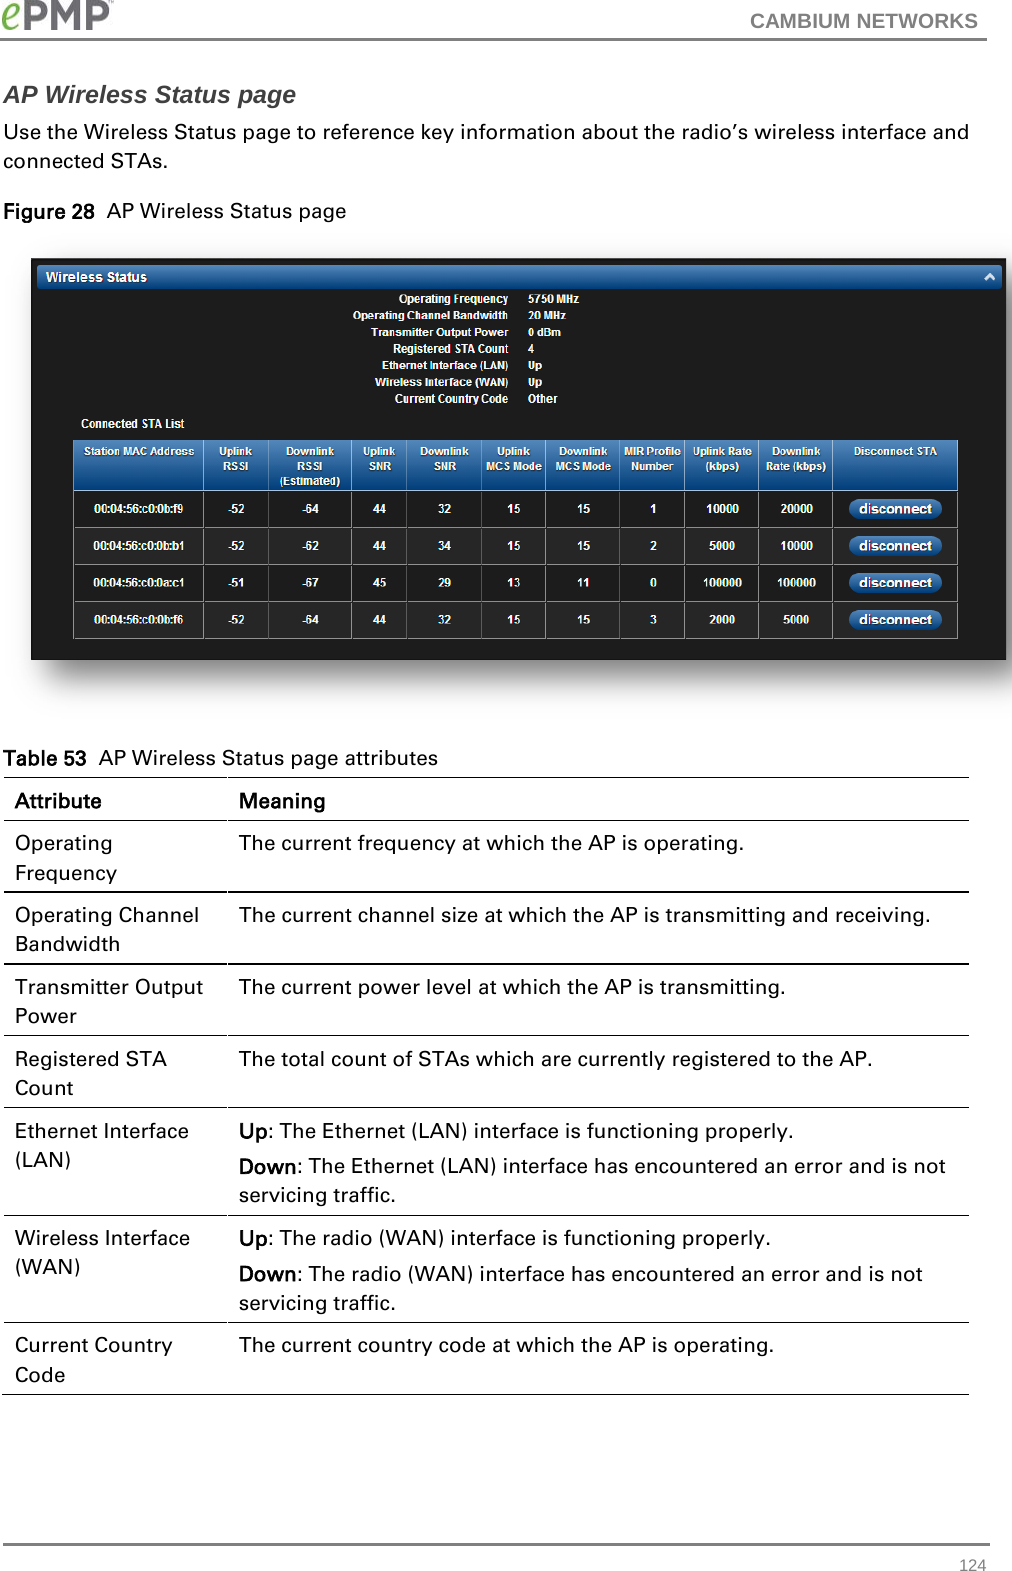 CAMBIUM NETWORKS  AP Wireless Status page Use the Wireless Status page to reference key information about the radio’s wireless interface and connected STAs. Figure 28  AP Wireless Status page  Table 53  AP Wireless Status page attributes Attribute Meaning Operating Frequency The current frequency at which the AP is operating. Operating Channel Bandwidth The current channel size at which the AP is transmitting and receiving. Transmitter Output Power The current power level at which the AP is transmitting. Registered STA Count The total count of STAs which are currently registered to the AP. Ethernet Interface (LAN) Up: The Ethernet (LAN) interface is functioning properly. Down: The Ethernet (LAN) interface has encountered an error and is not servicing traffic. Wireless Interface (WAN) Up: The radio (WAN) interface is functioning properly. Down: The radio (WAN) interface has encountered an error and is not servicing traffic. Current Country Code The current country code at which the AP is operating.  124 